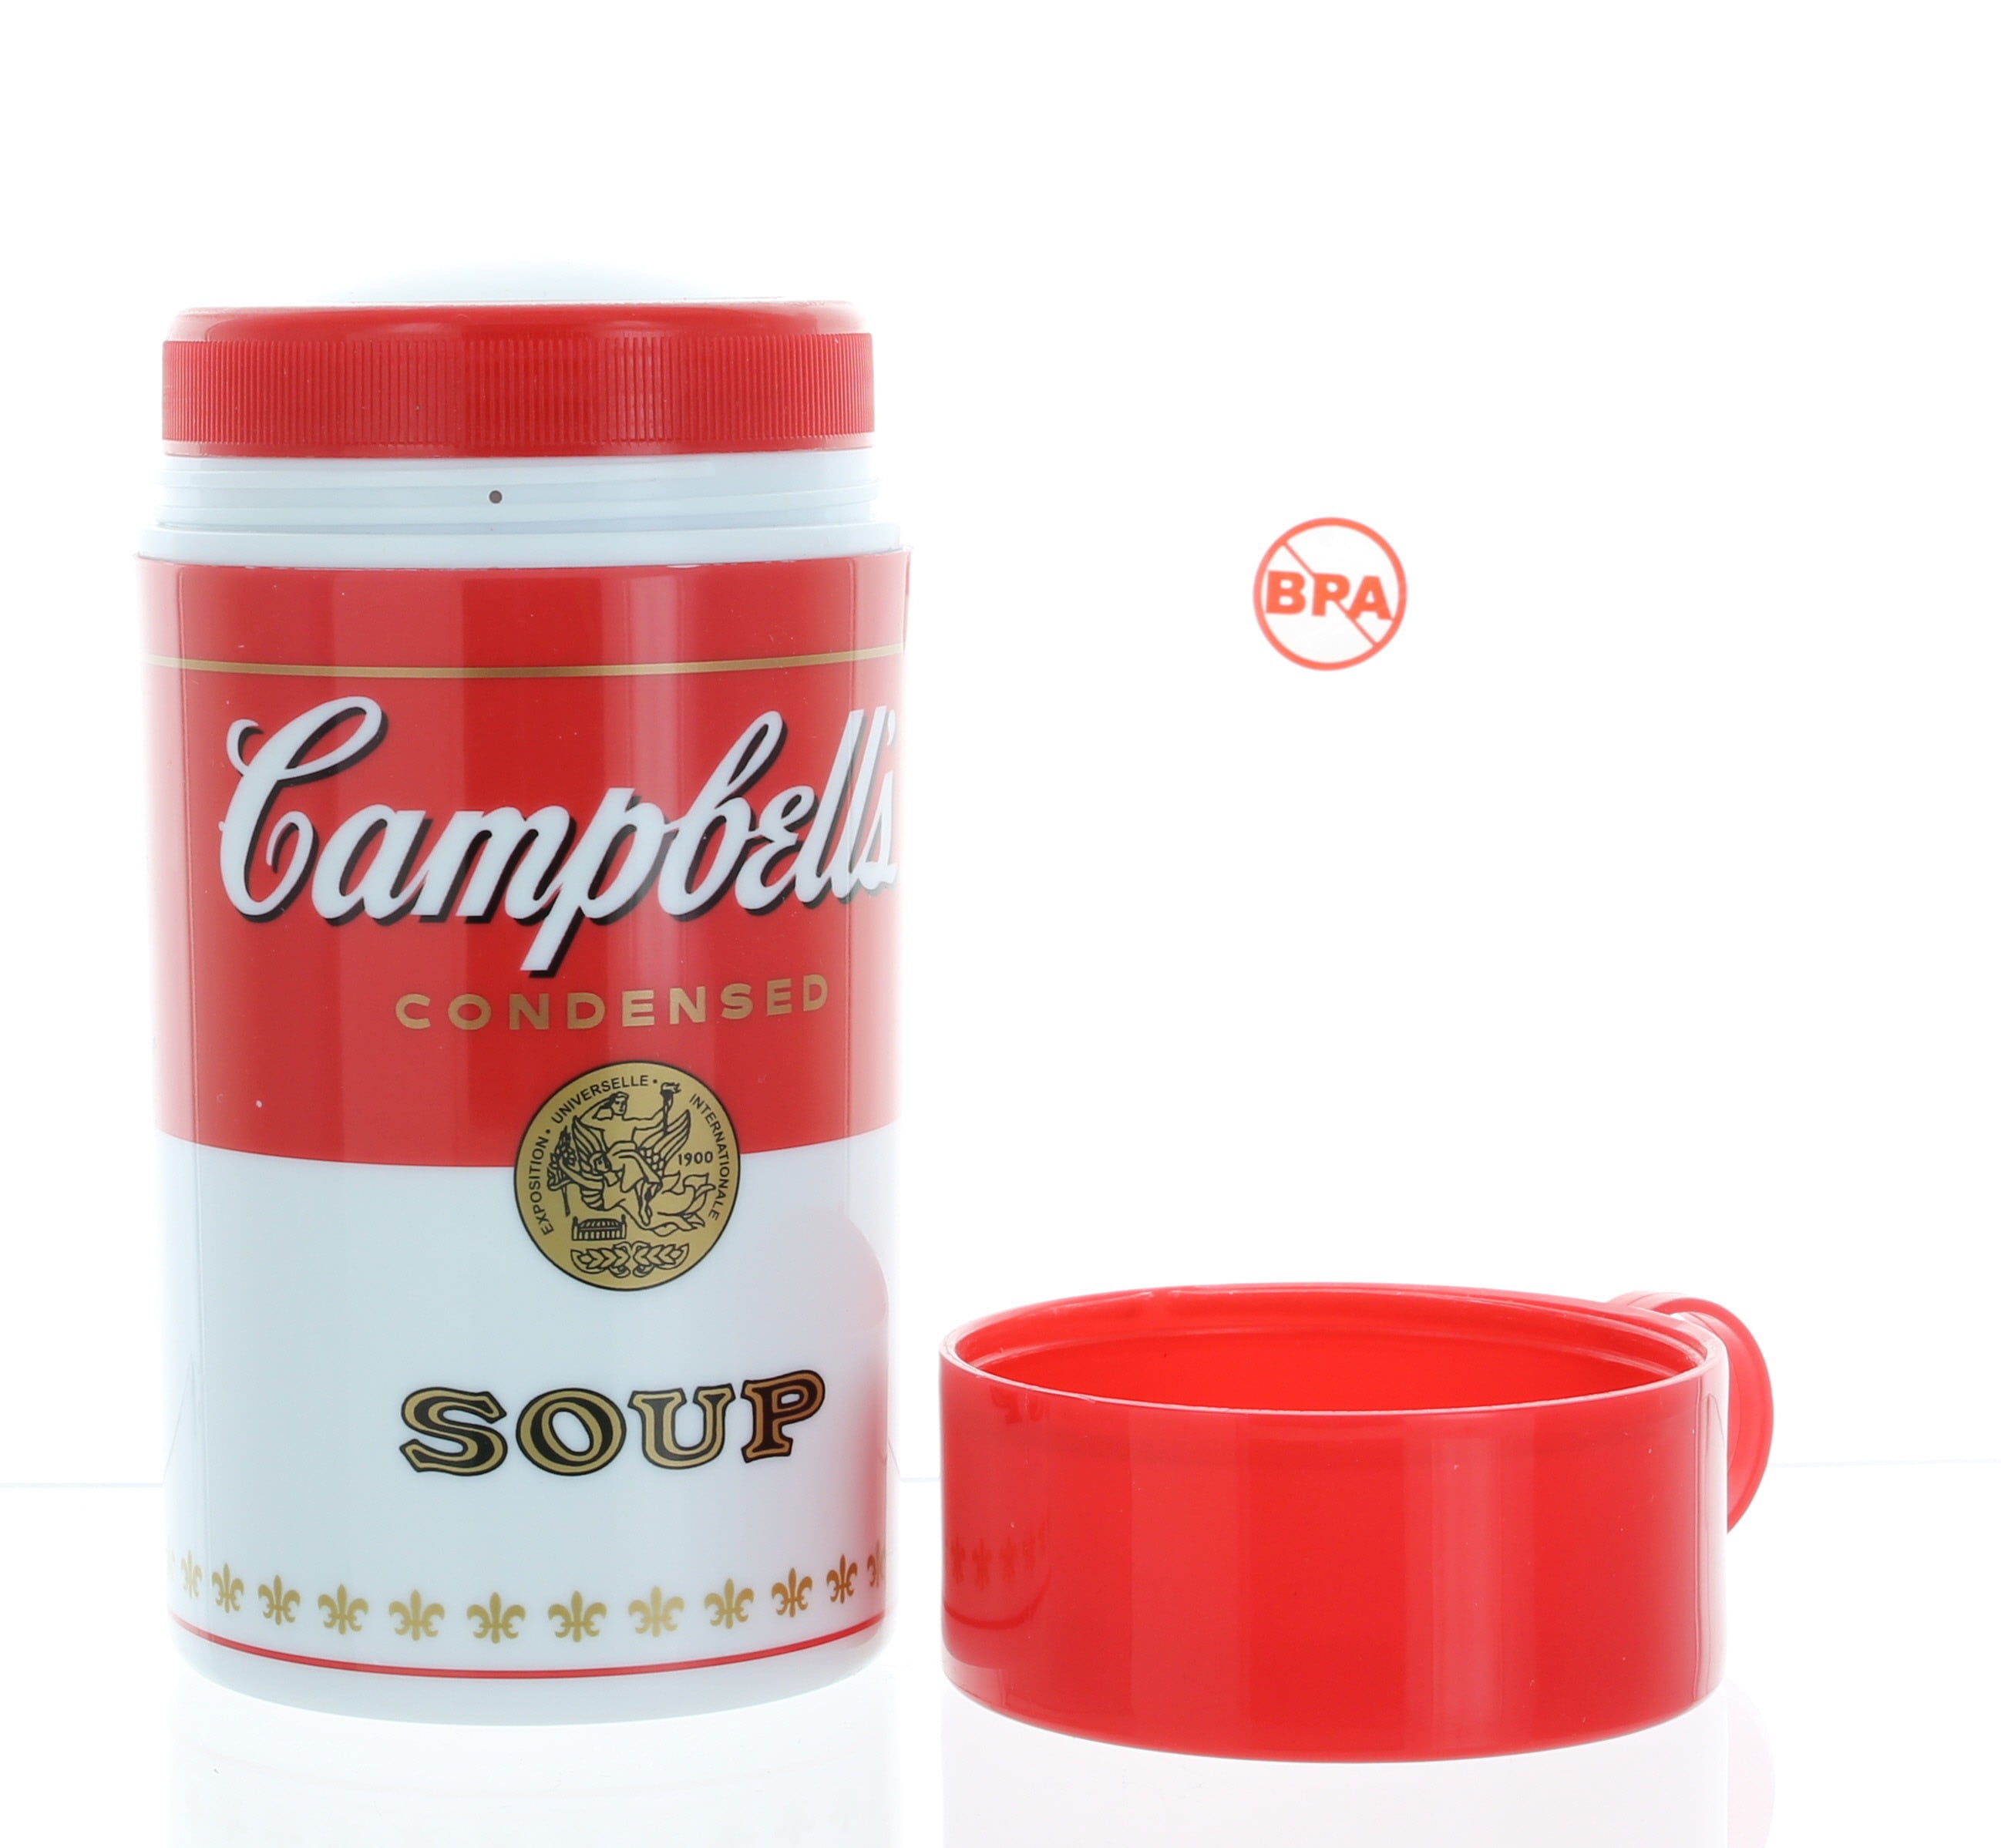 Vintage Campbell's Soup Thermos, can-tainer, Red and White